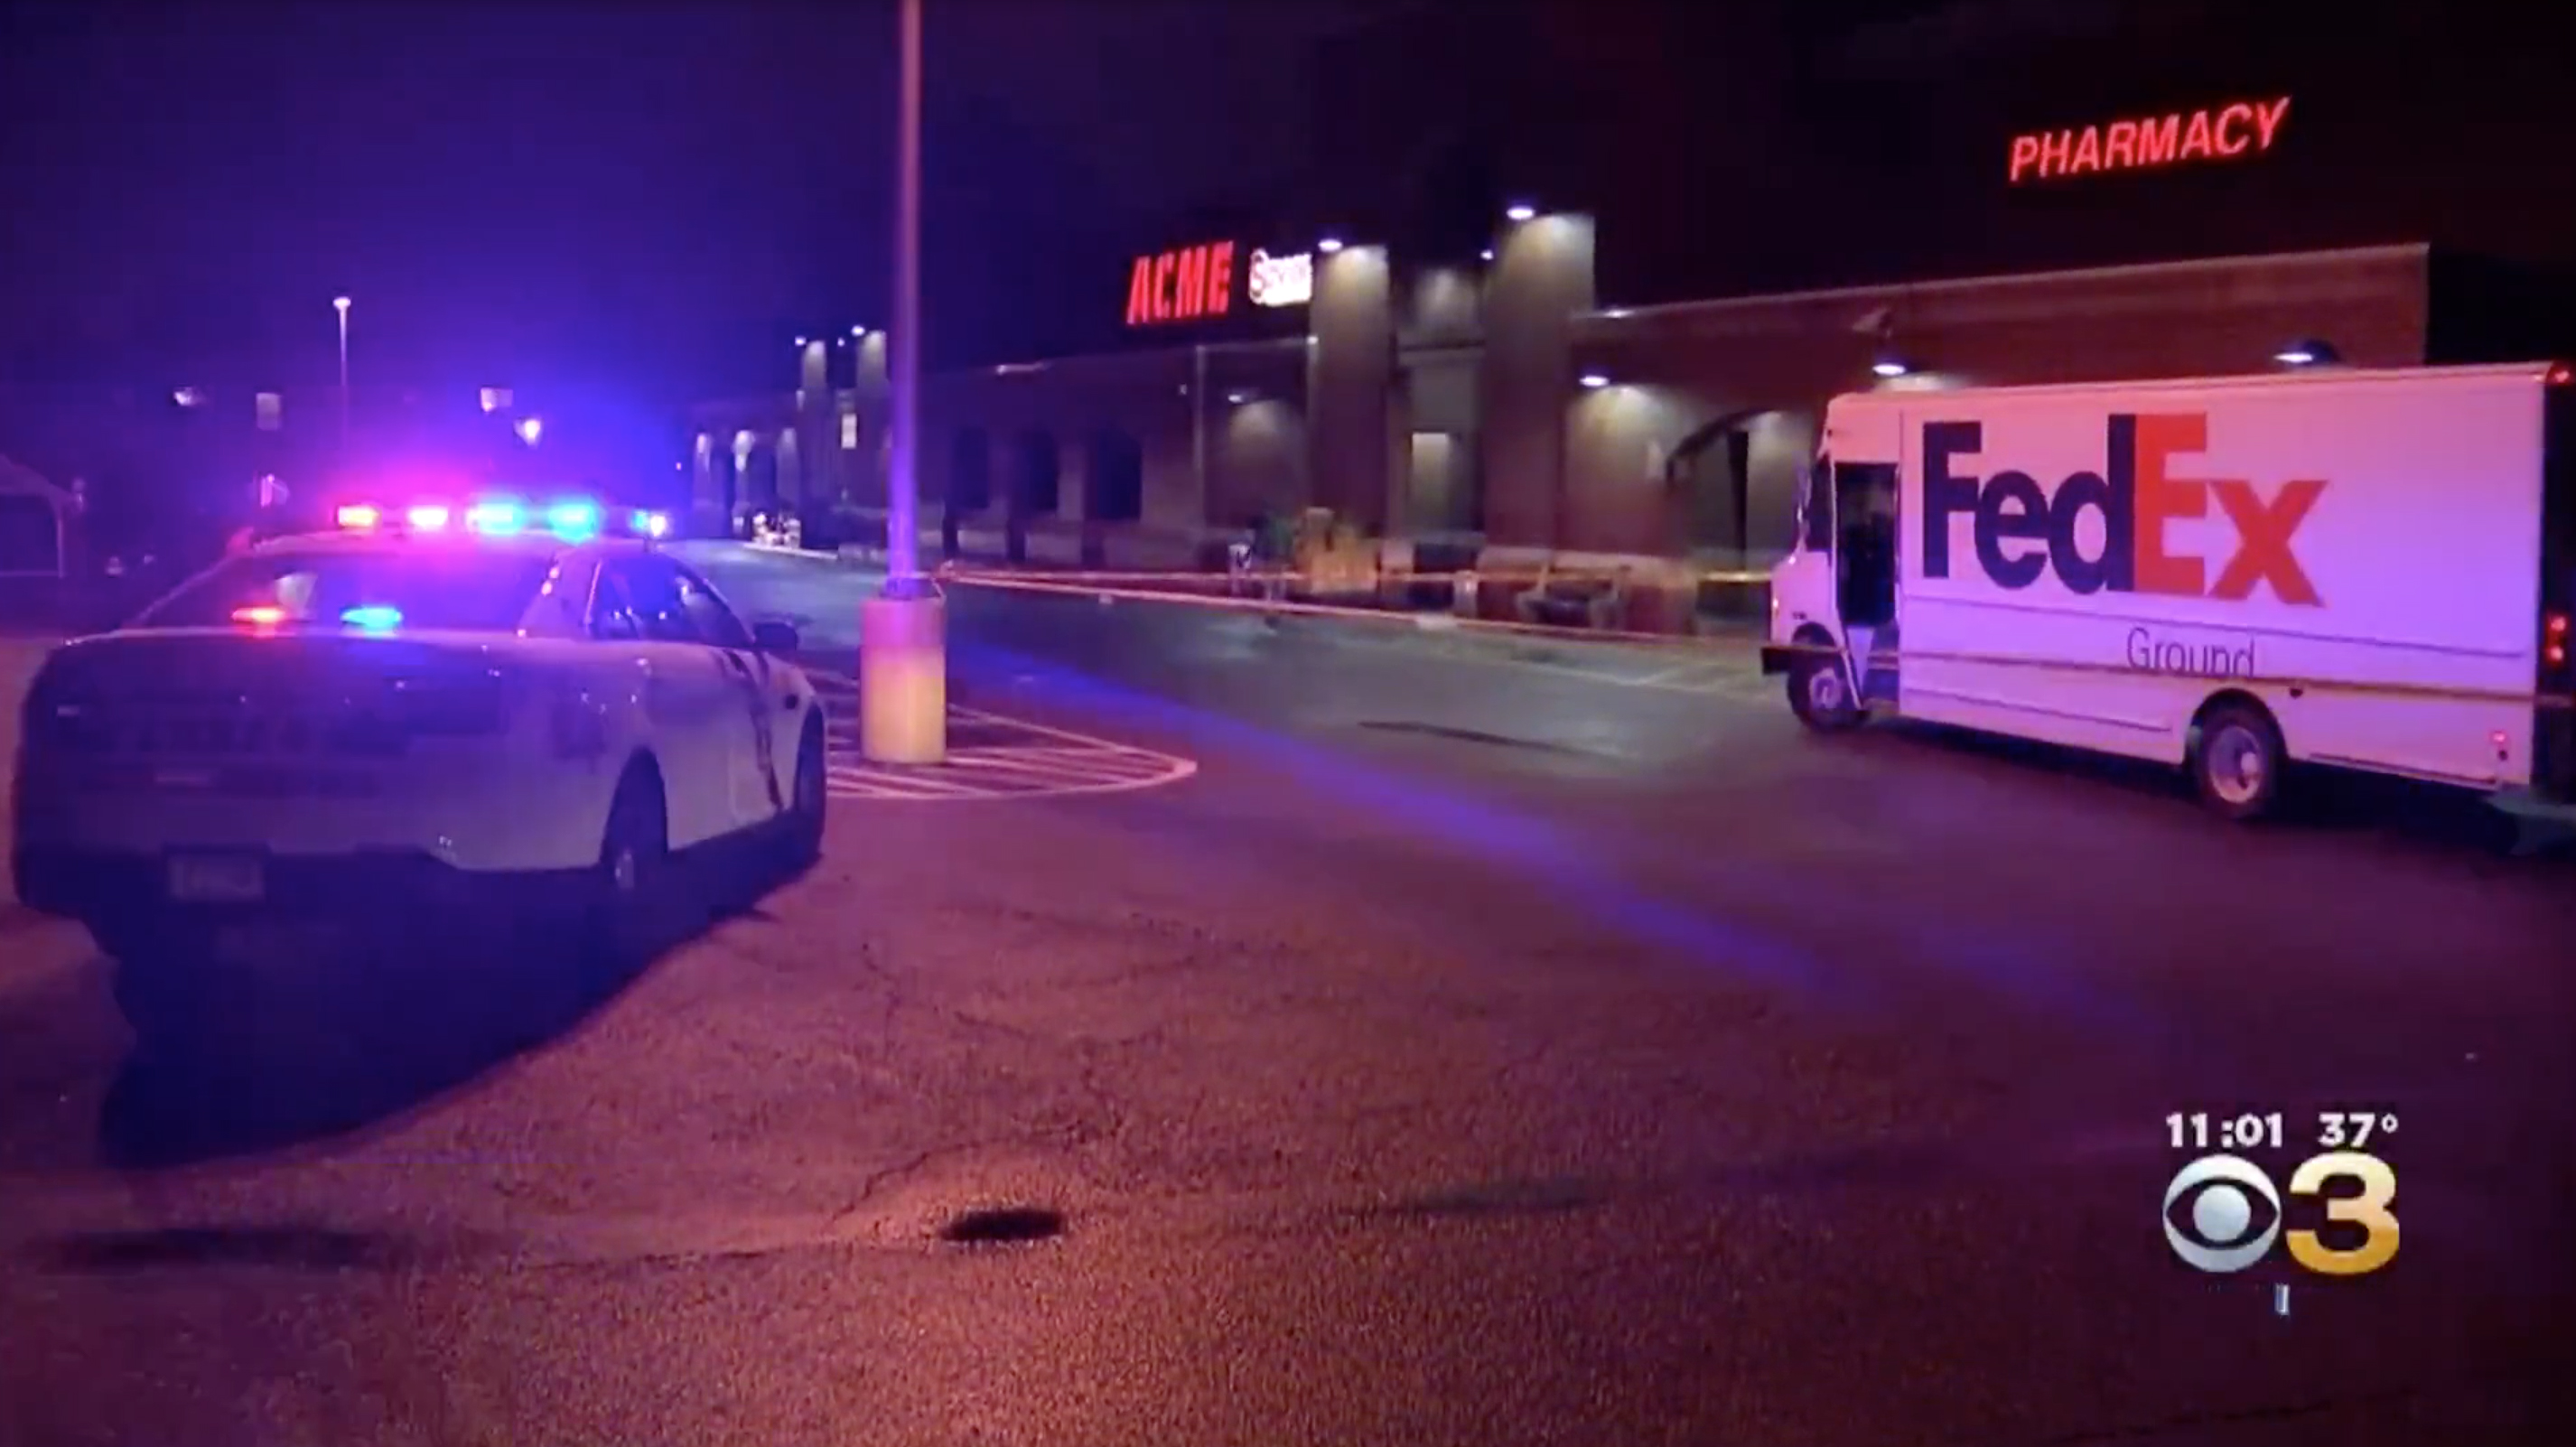 A FedEx driver shot and killed an attacker in Philadelphia.